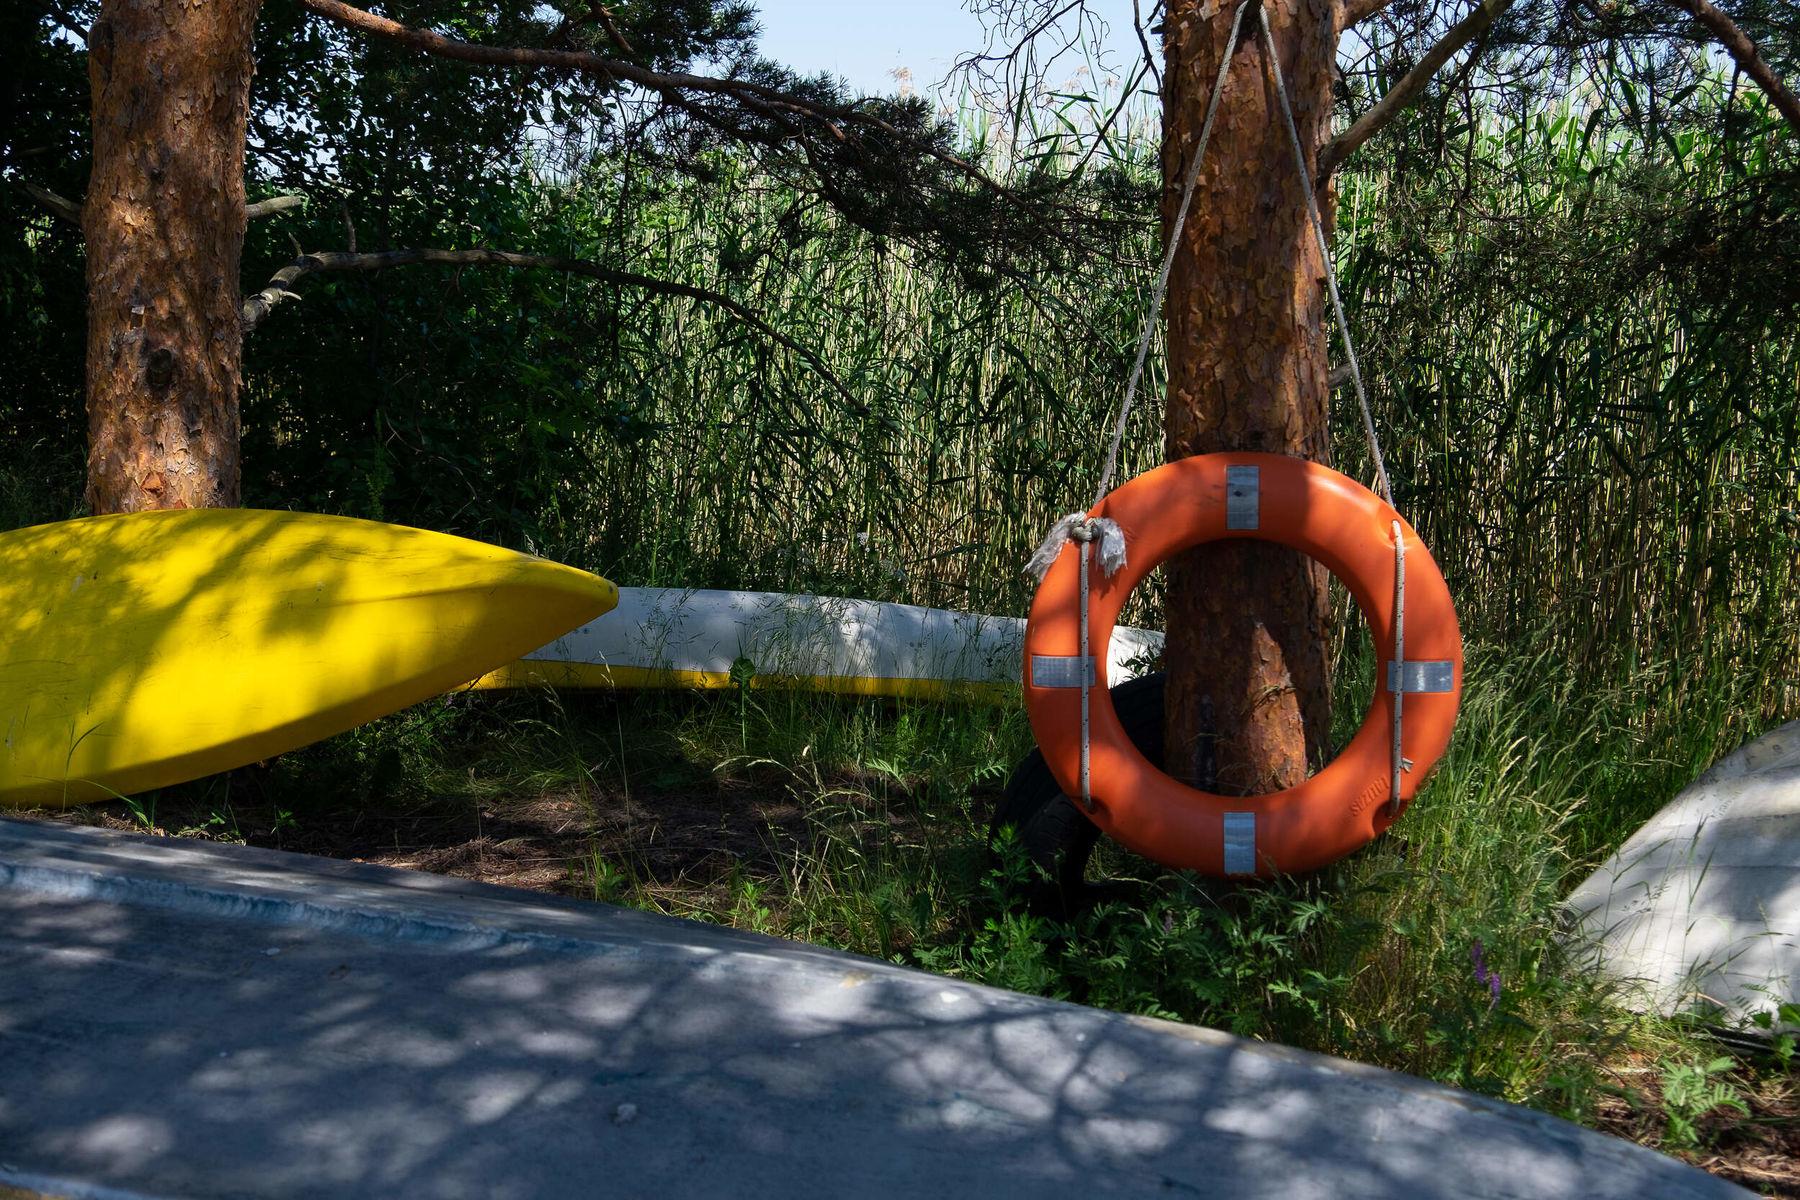 Life-buoy hanging from a tree